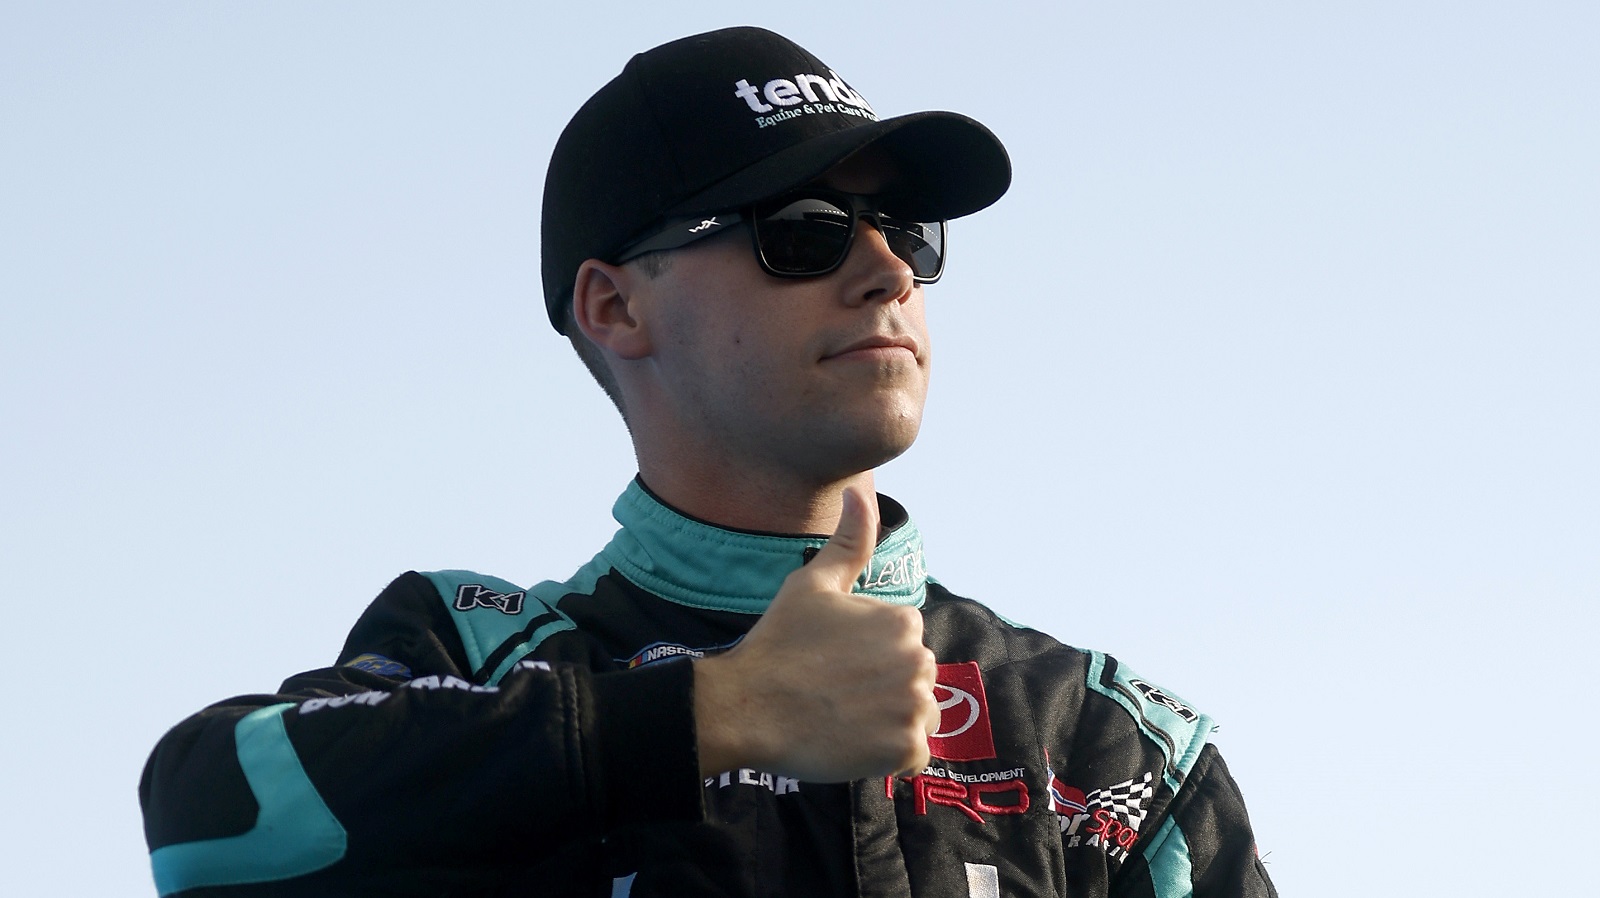 Ben Rhodes, driver of the No. 99 Toyota, gives a thumbs-up to fans as he walks onstage during driver intros prior to the NASCAR Camping World Truck Series Heart of America 200 at Kansas Speedway on May 14, 2022.